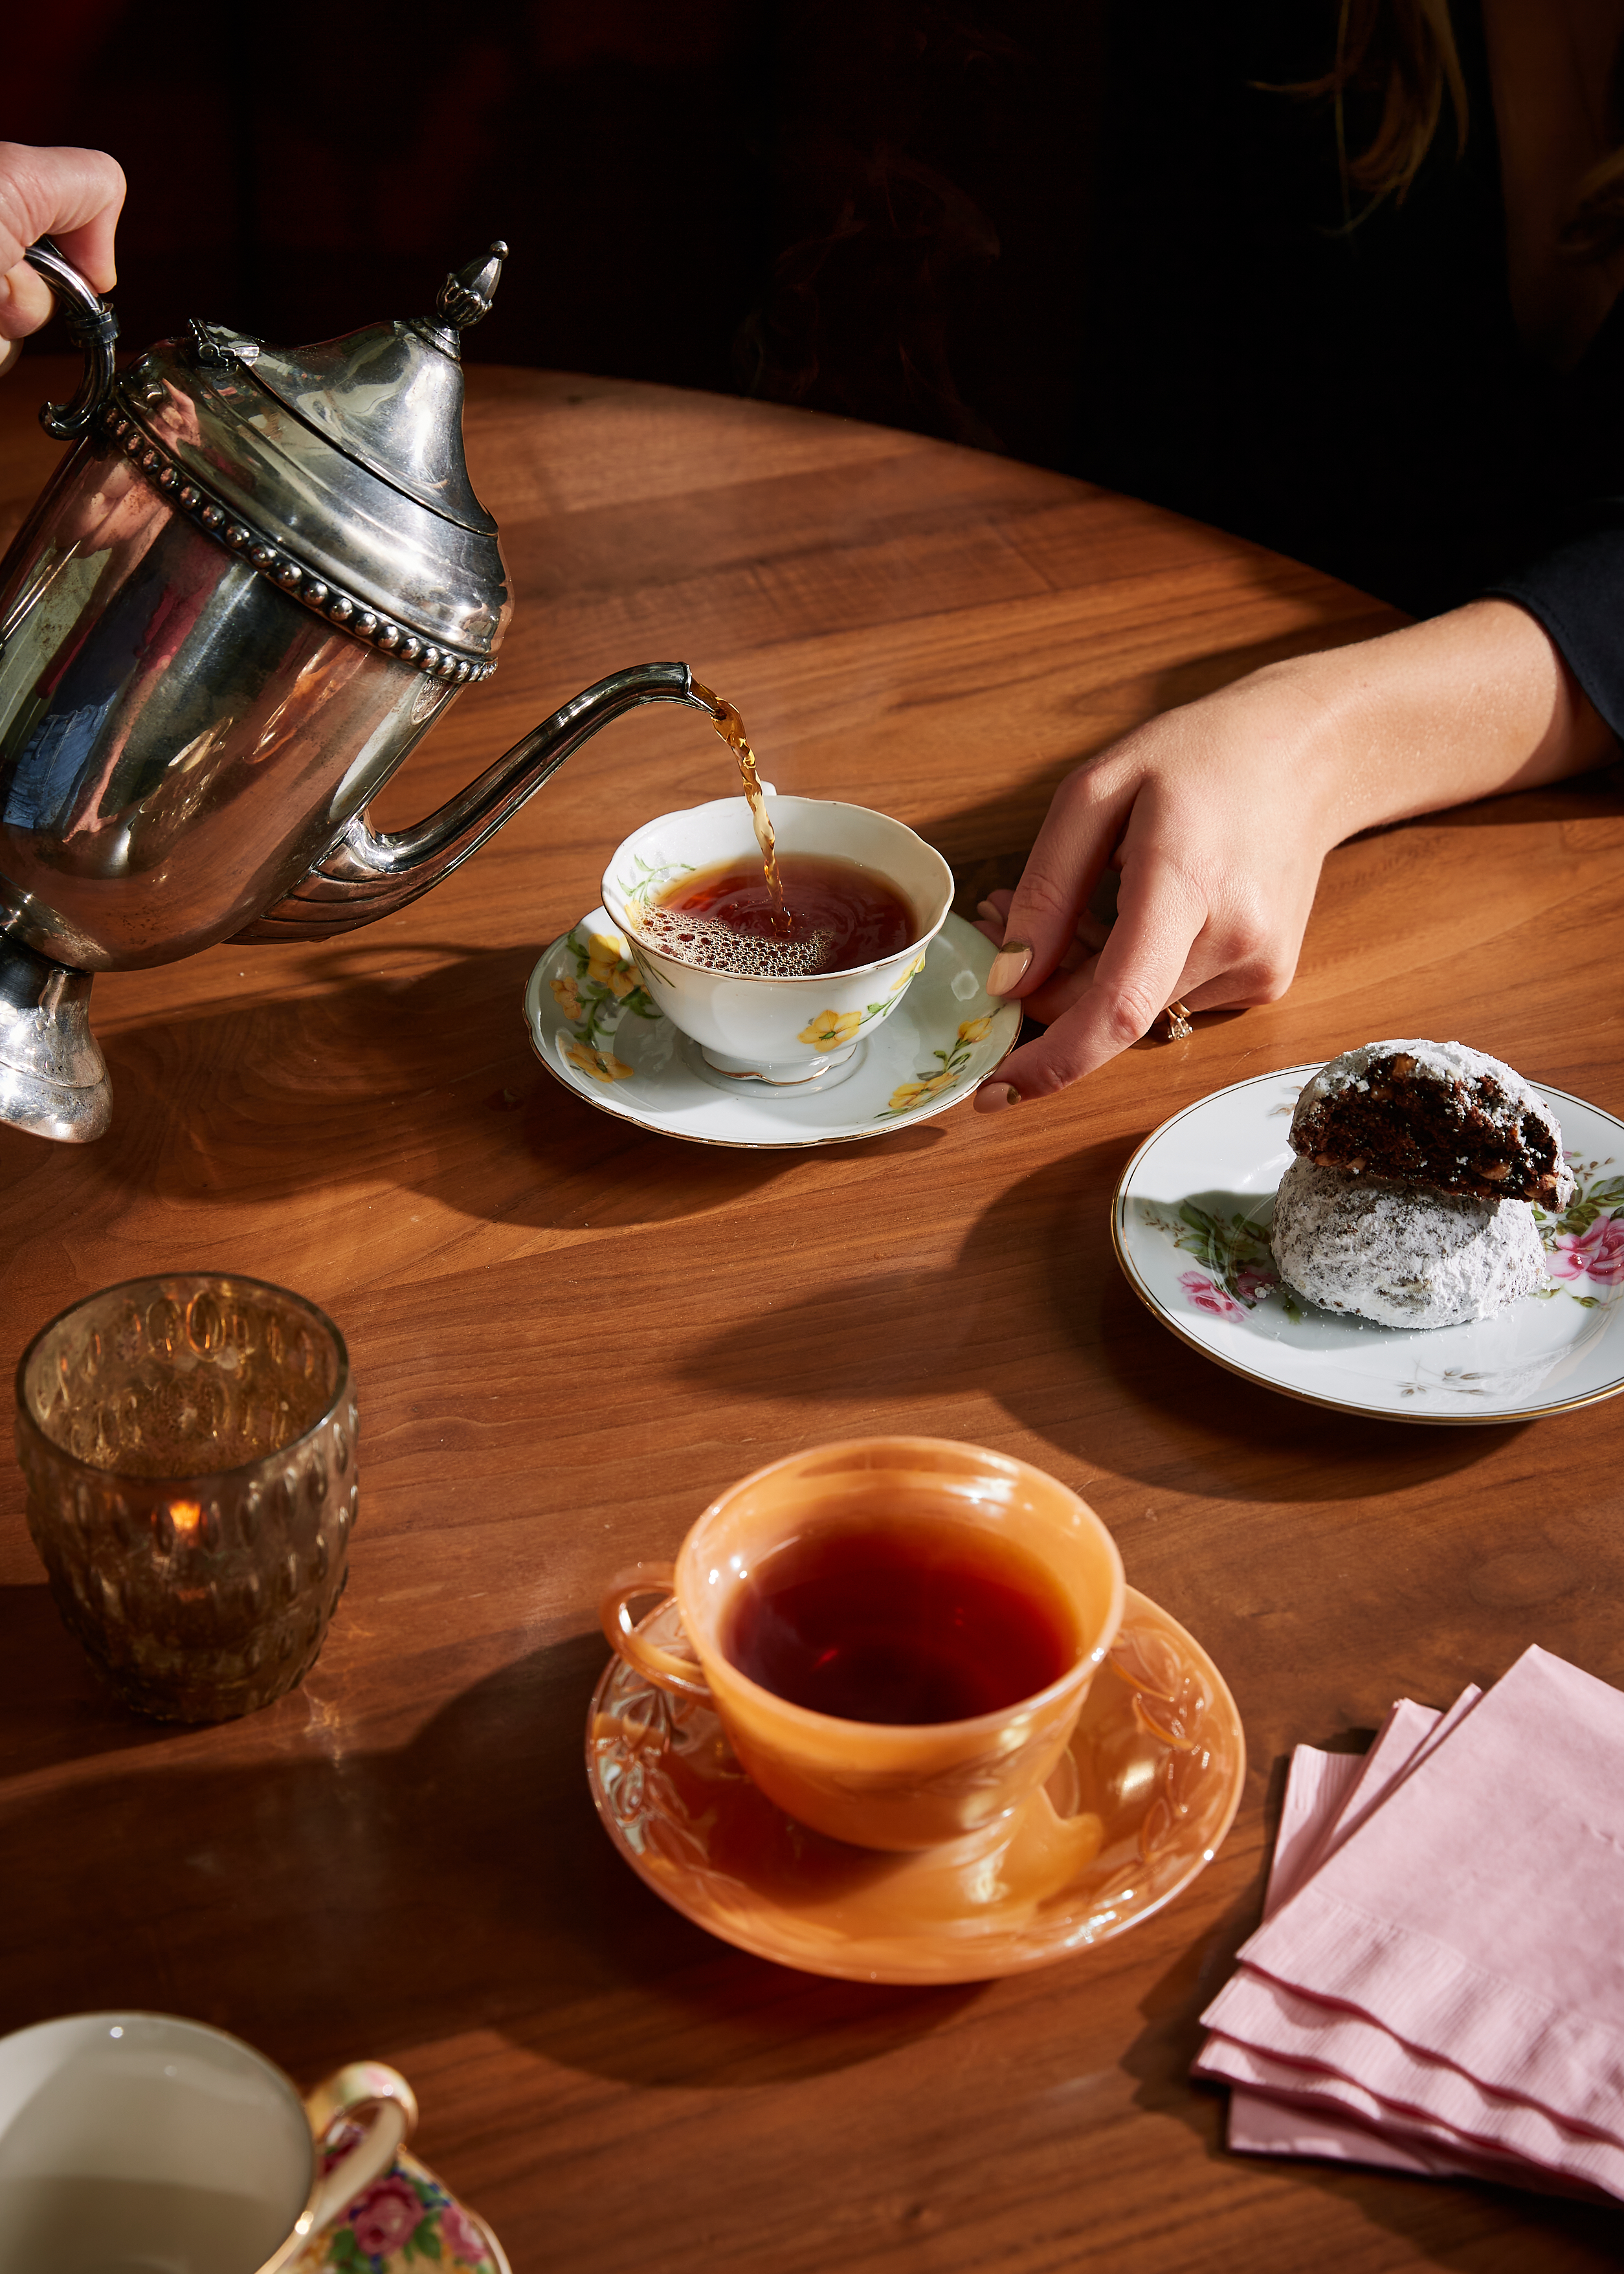 Tea is poured into a tea cup from a silver pot.